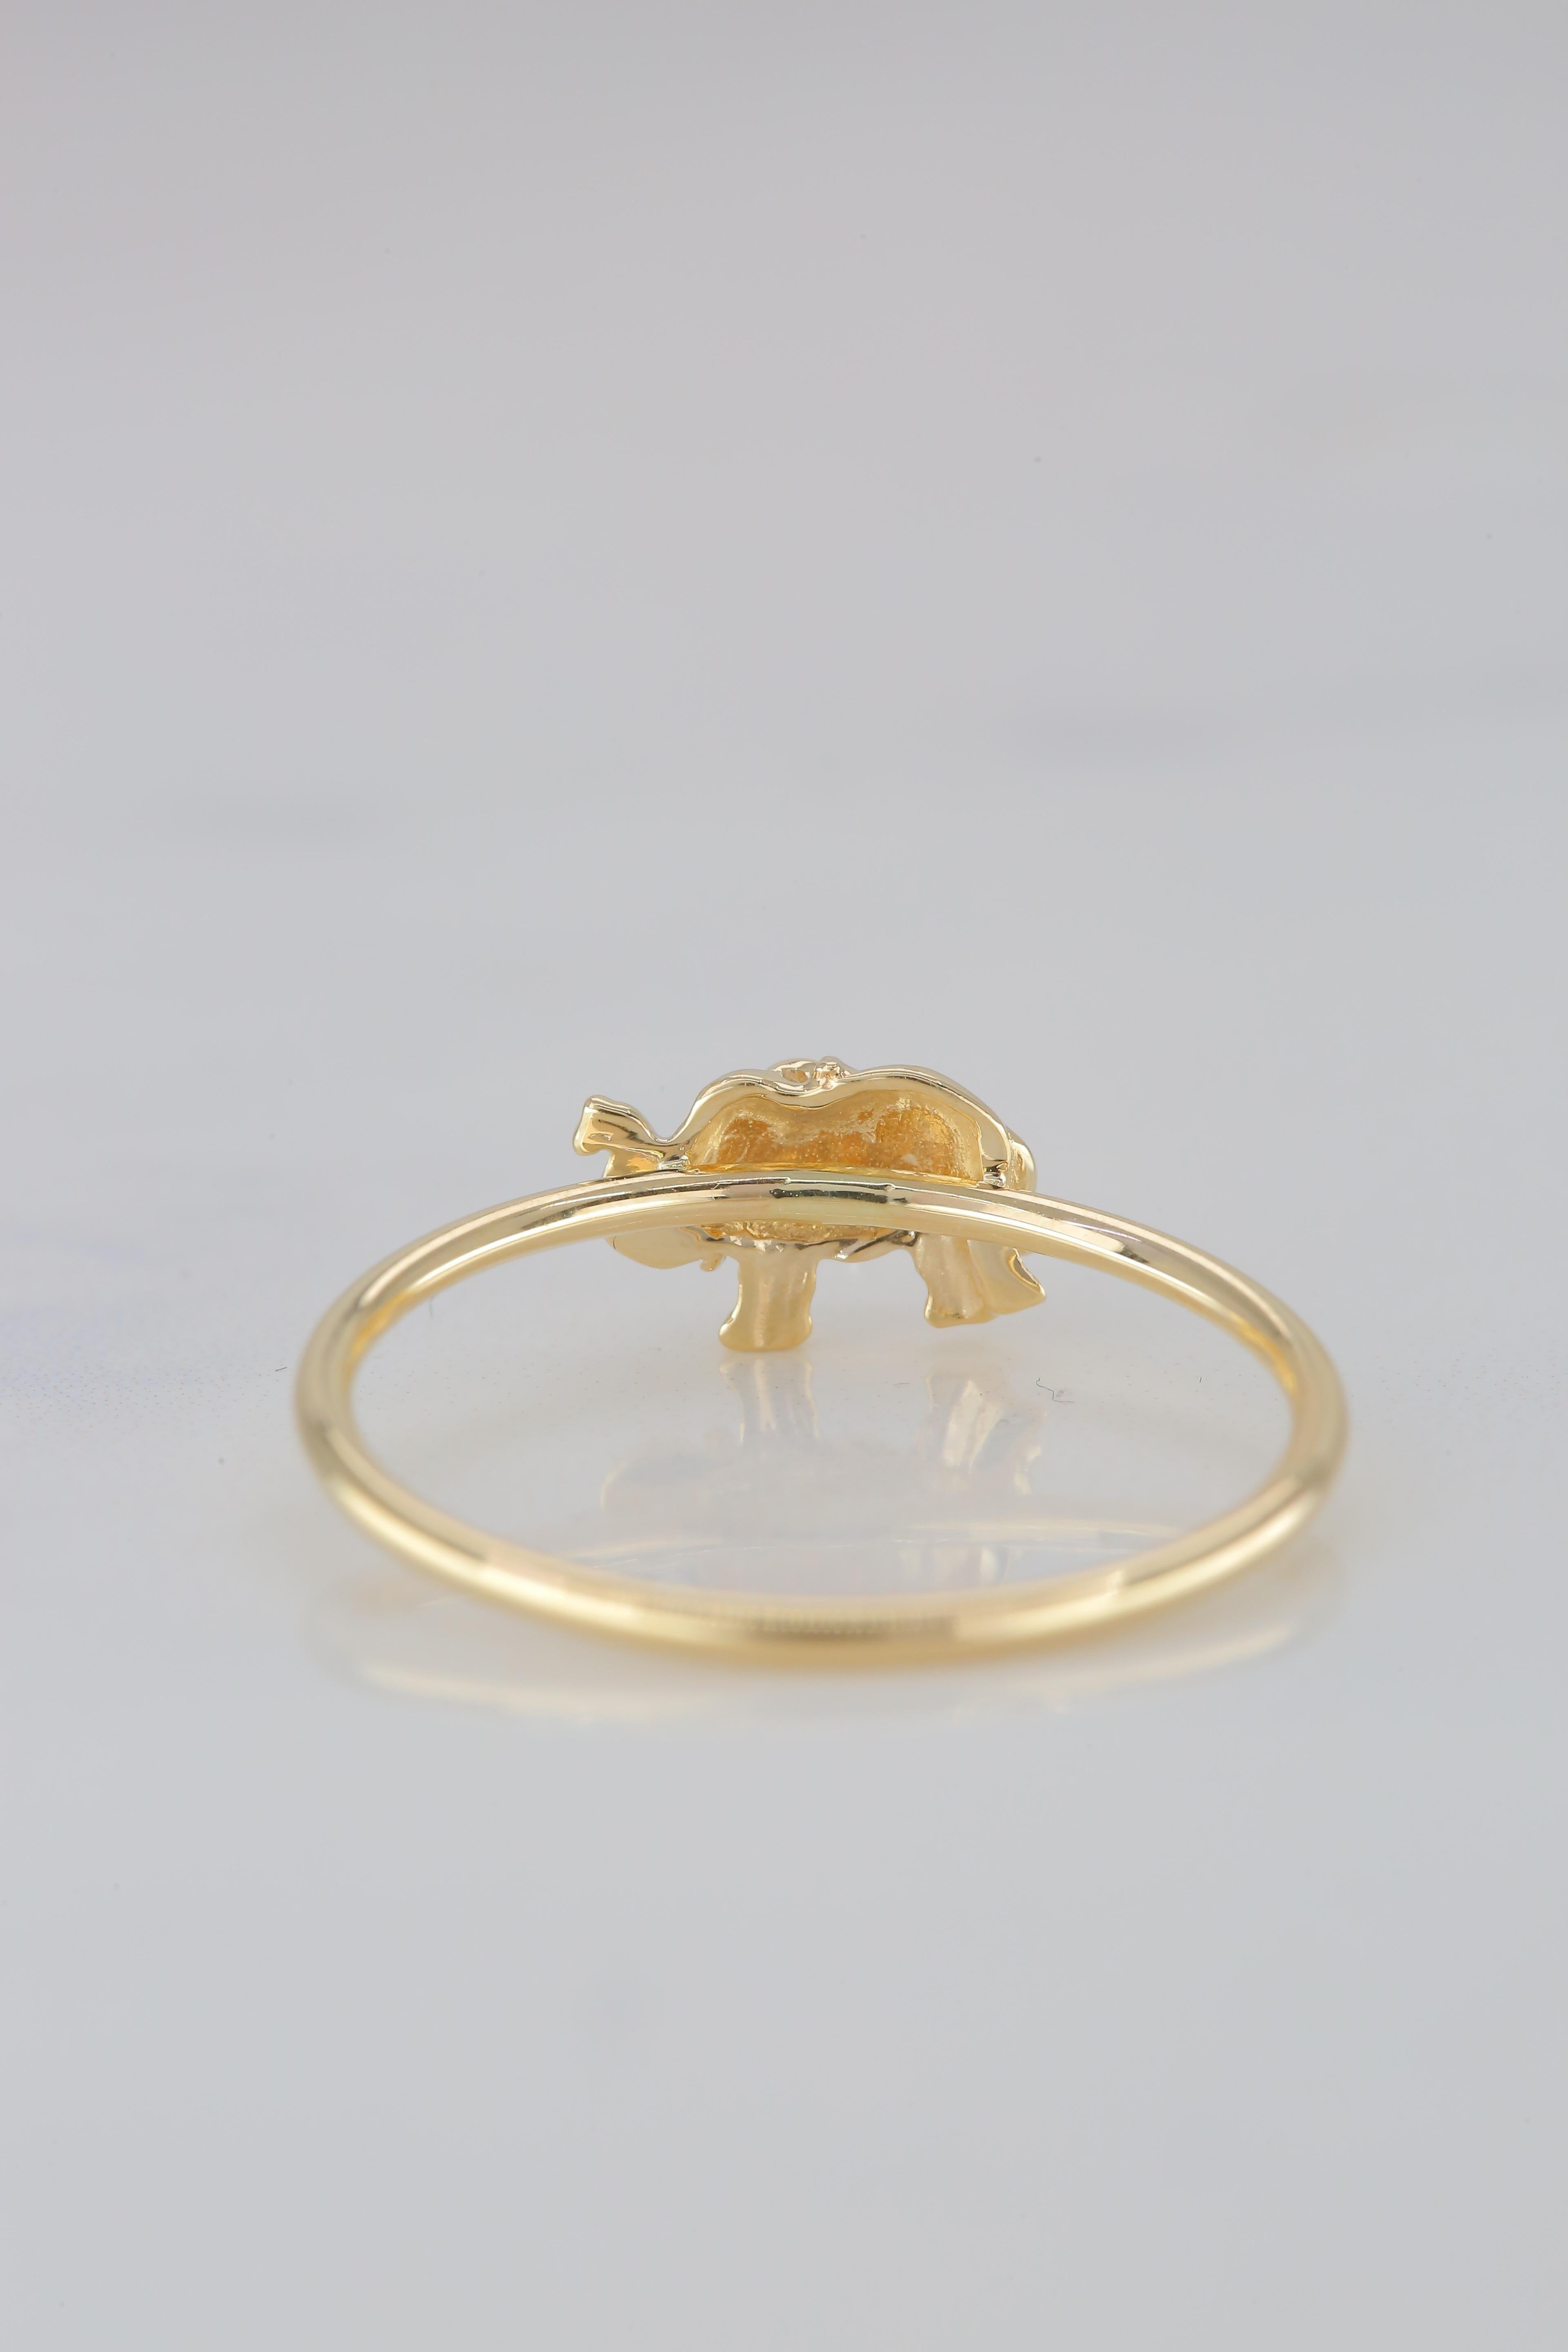 For Sale:  14K Gold Elephant Ring, Pinky Elephant Ring, 14K Gold Elephant Animal Ring 6